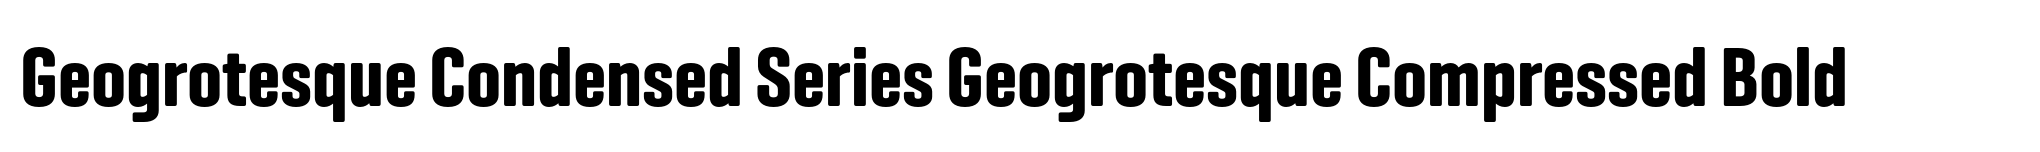 Geogrotesque Condensed Series Geogrotesque Compressed Bold image